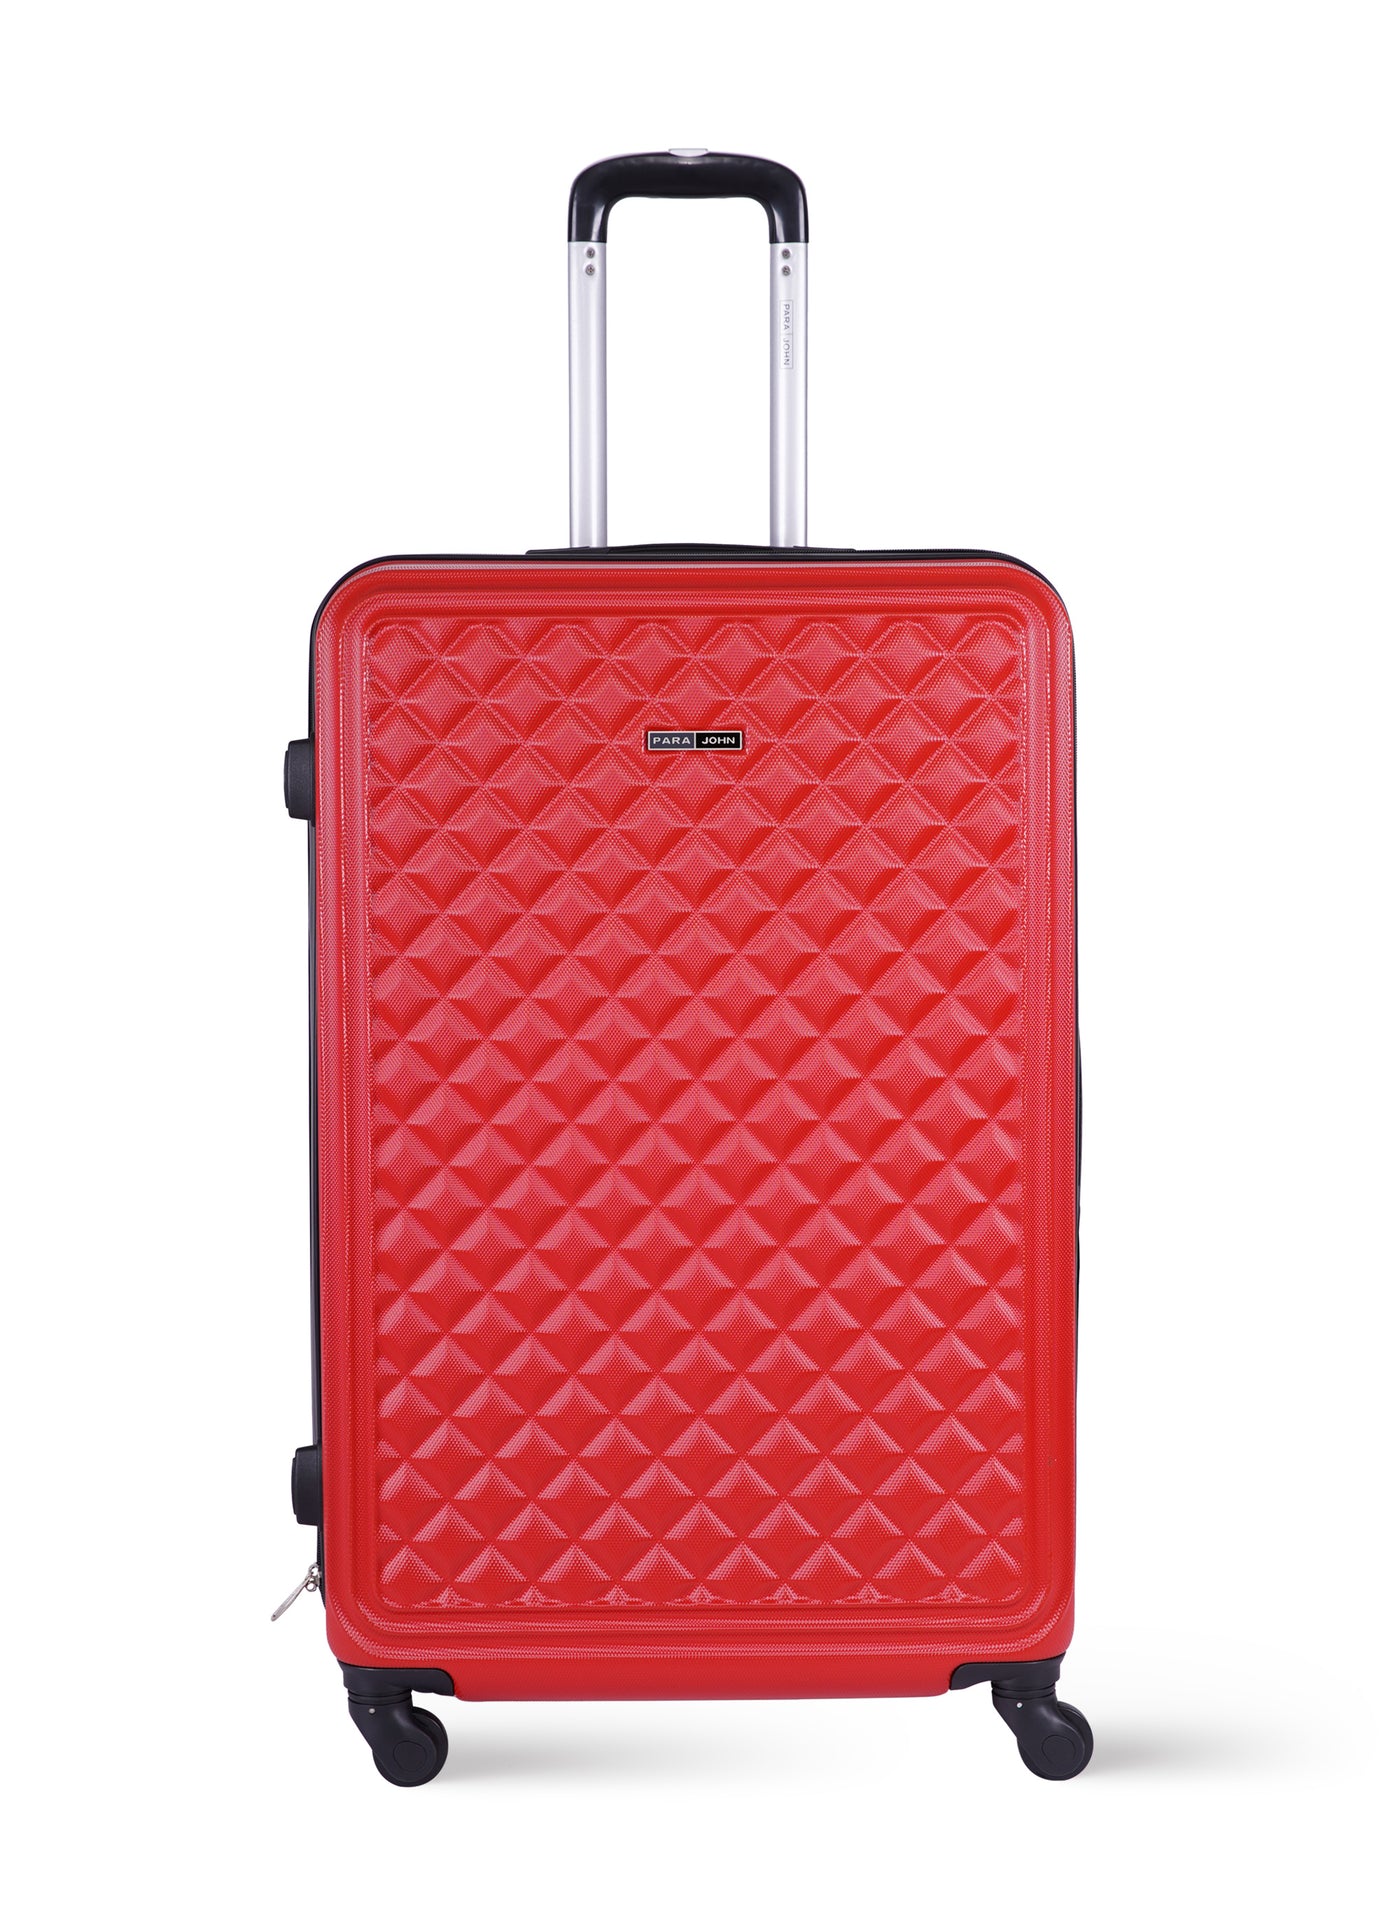 Fantasy Cabin Size ABS Hardside Spinner Luggage Trolley 20 Inch